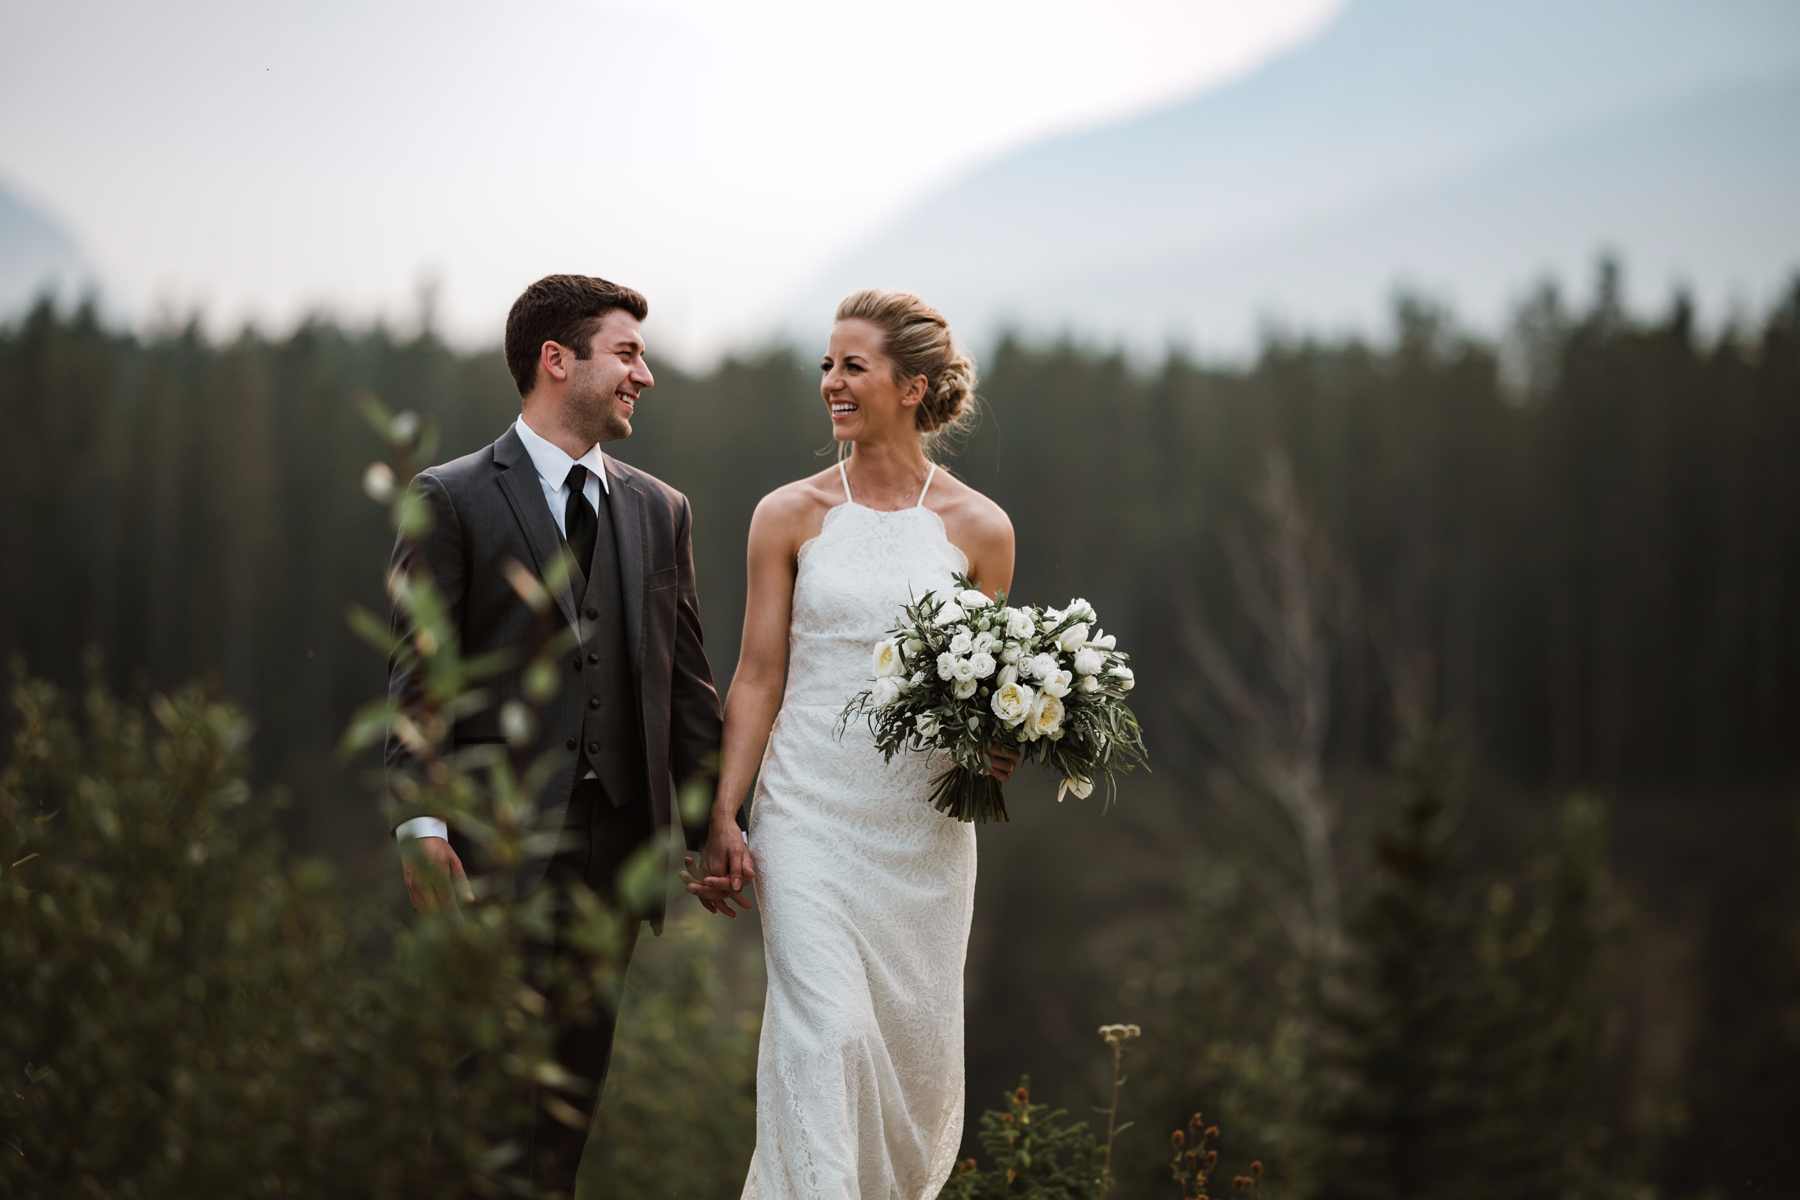 Calgary wedding photographer at Canmore and Banff destination elopement wedding in rocky mountains, Alberta, Canada - Photo 22